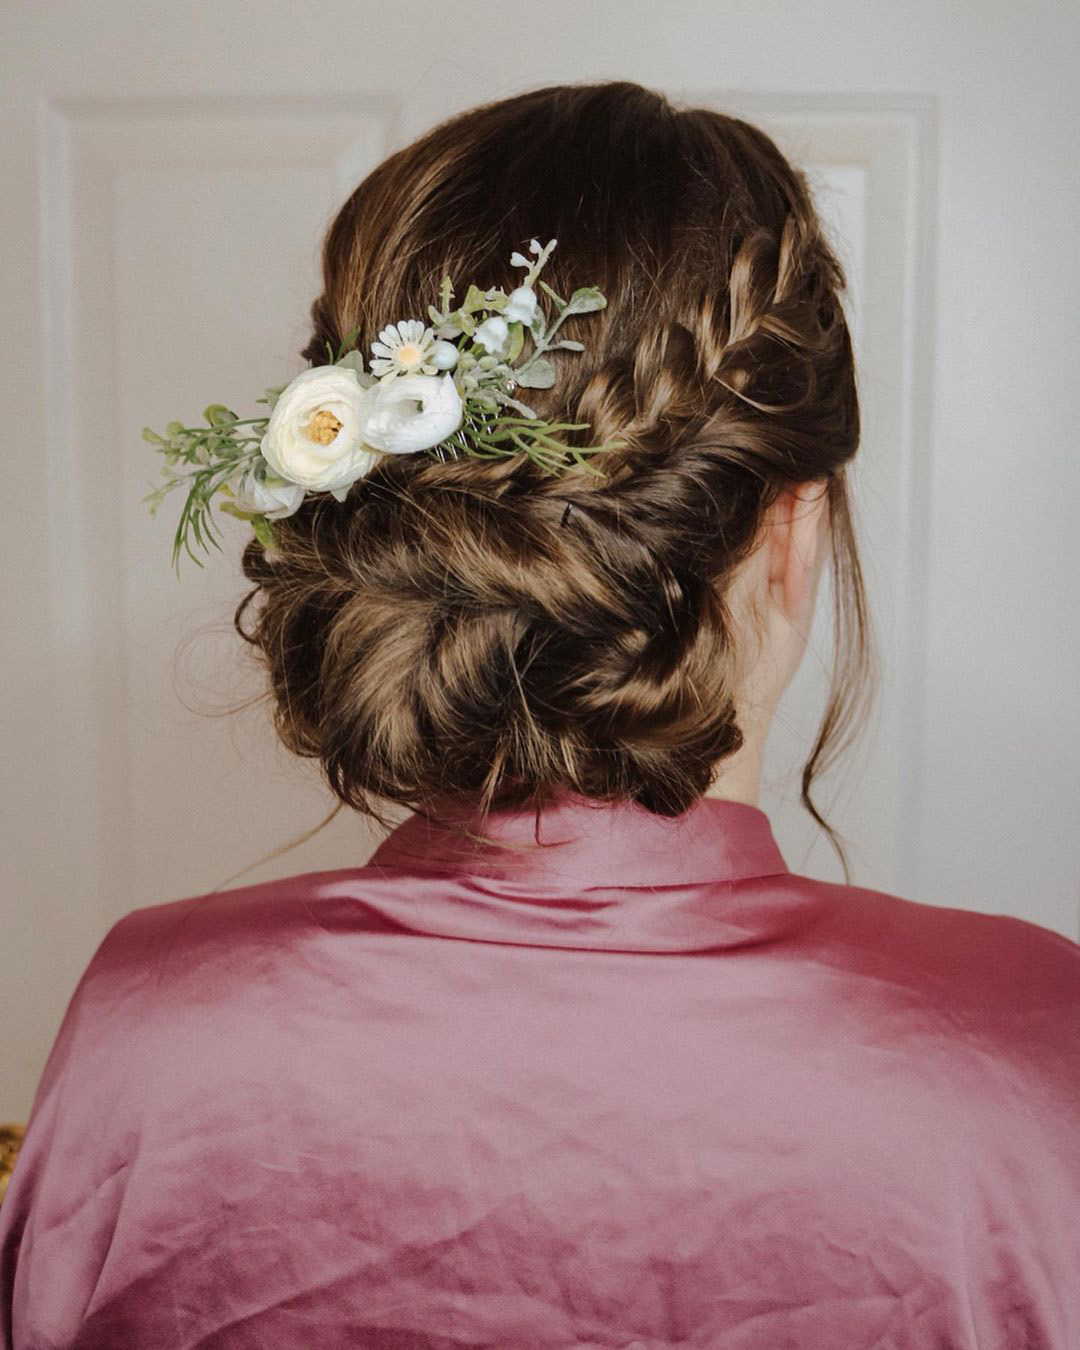 beach wedding hairstyles messy low bun with braids and flowers rebecca.murphy.beauty